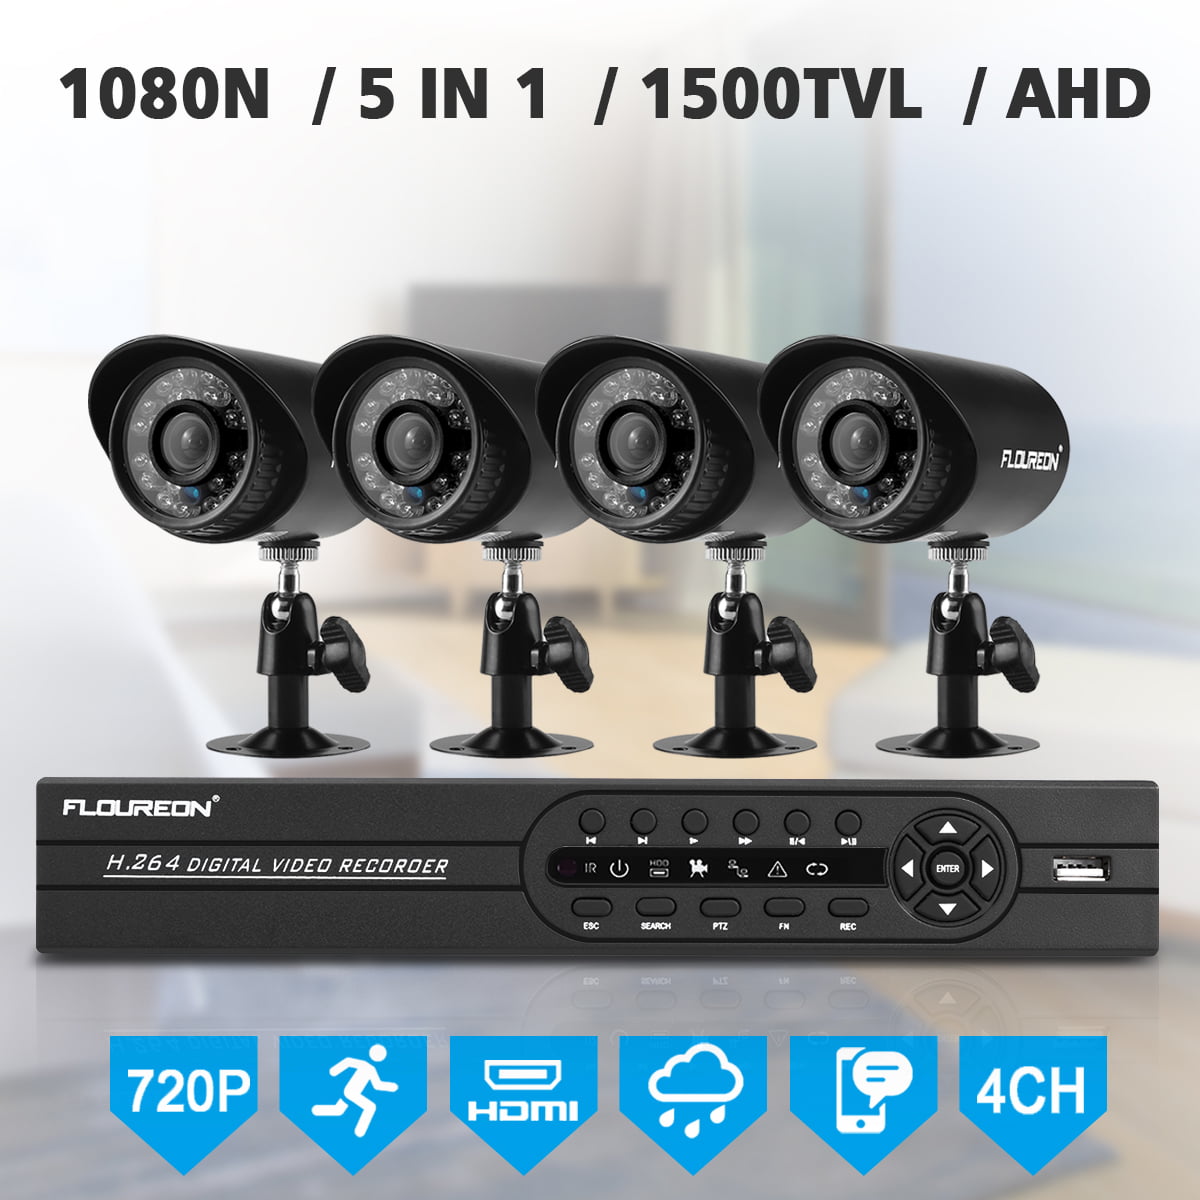 CCTV 4CH 1080N HD DVR Outdoor 2x 1500TVL 720P IP Camera Home Security System Kit 